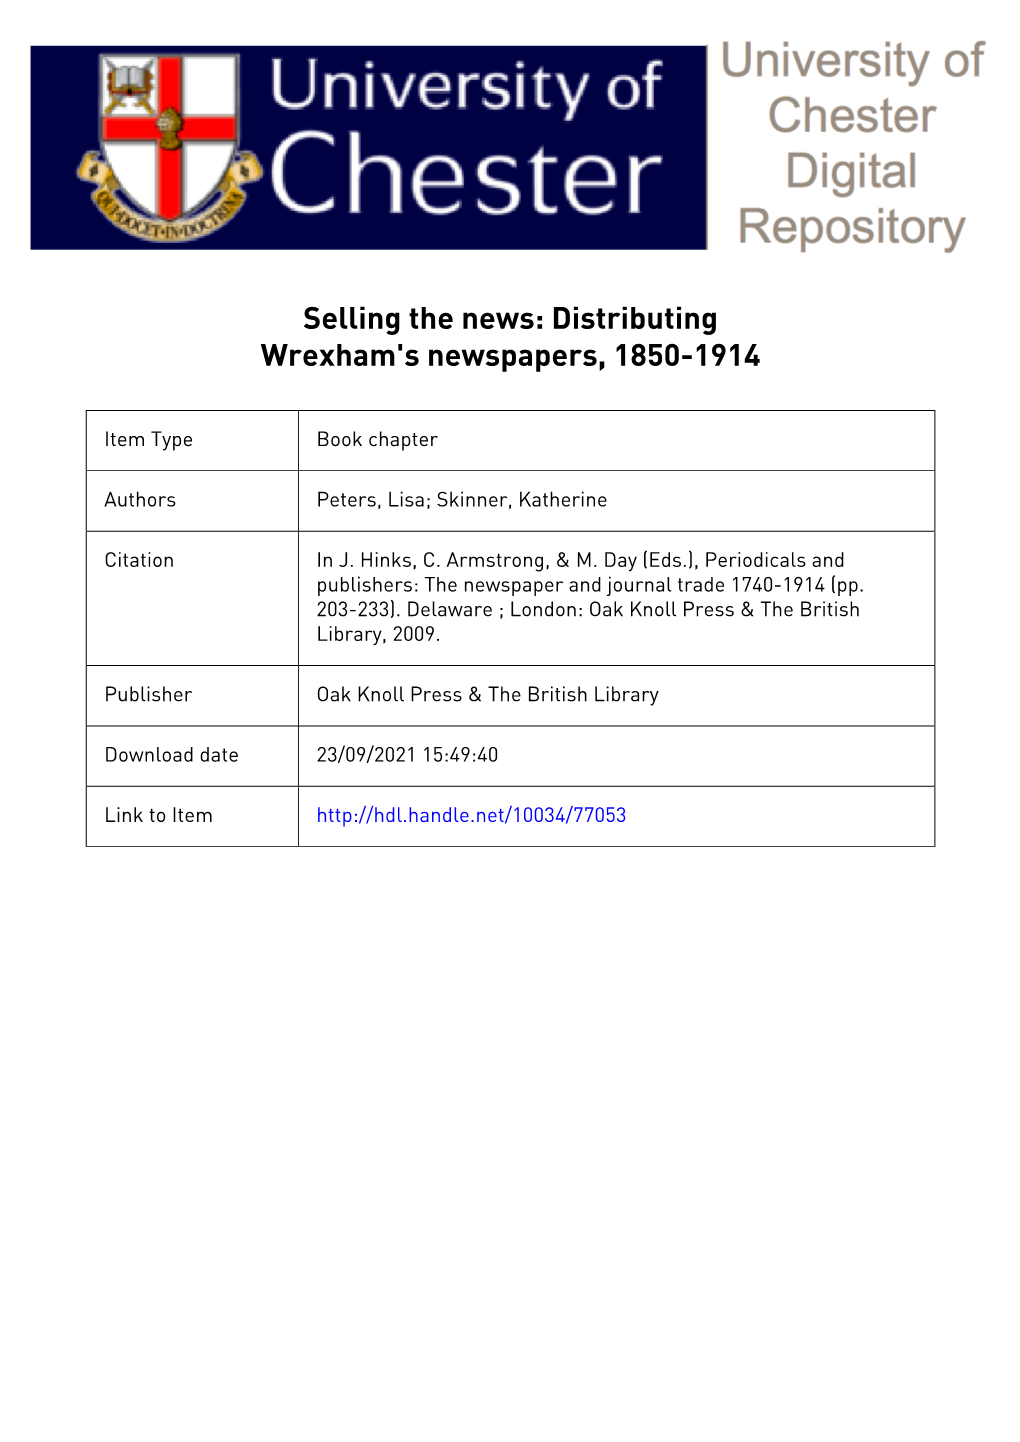 Selling the News: Distributing Wrexham's Newspapers, 1850-1914